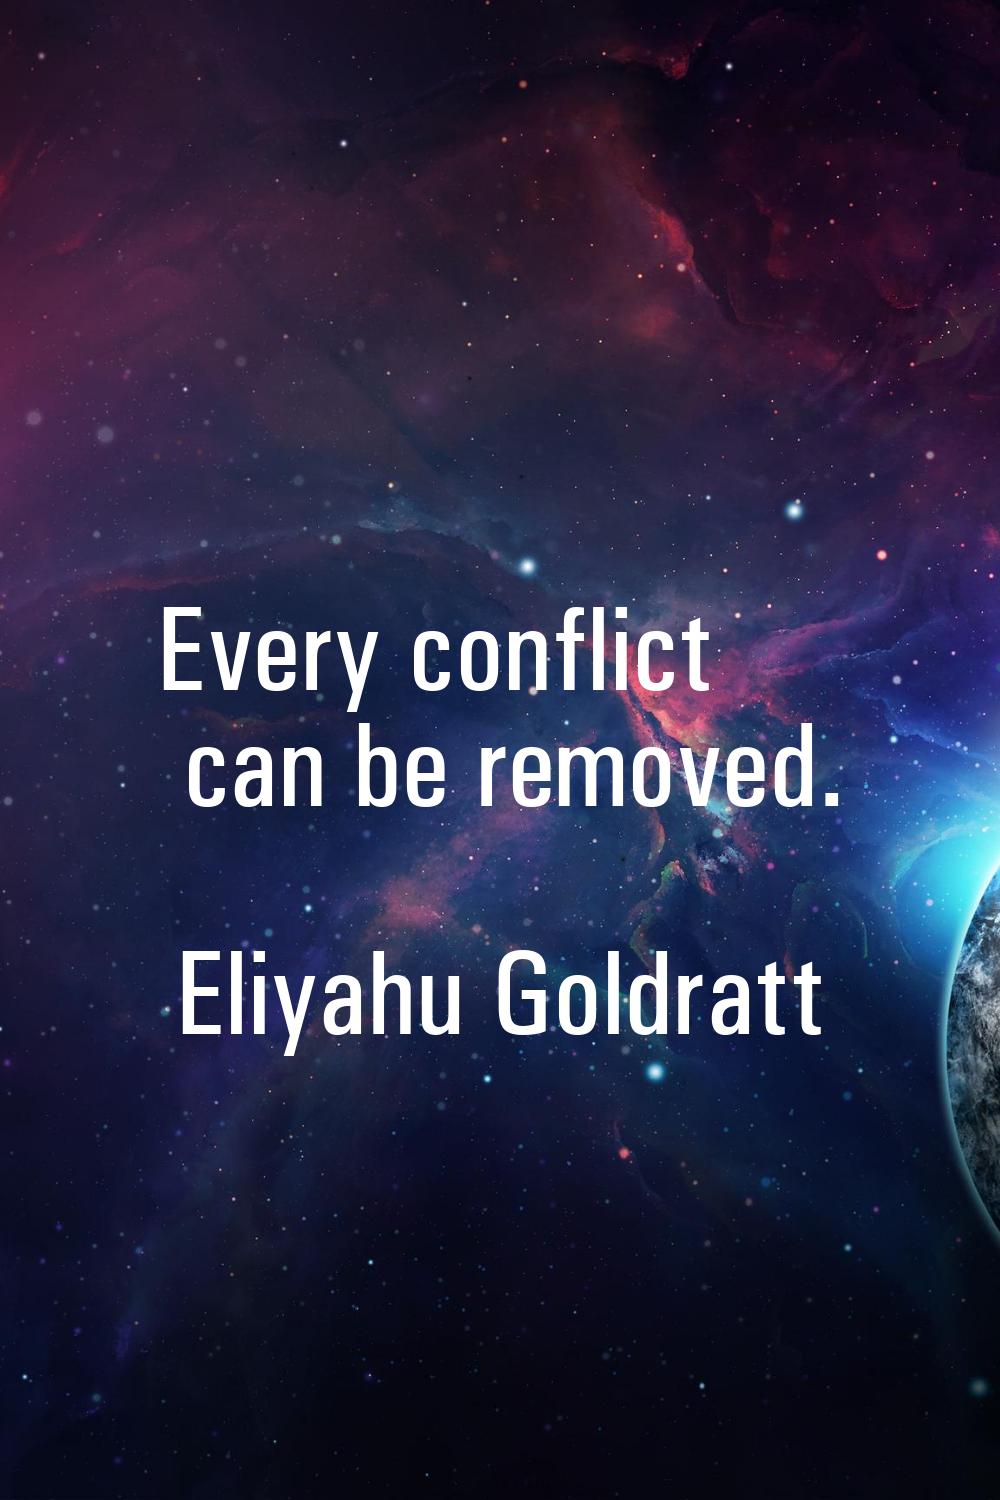 Every conflict can be removed.